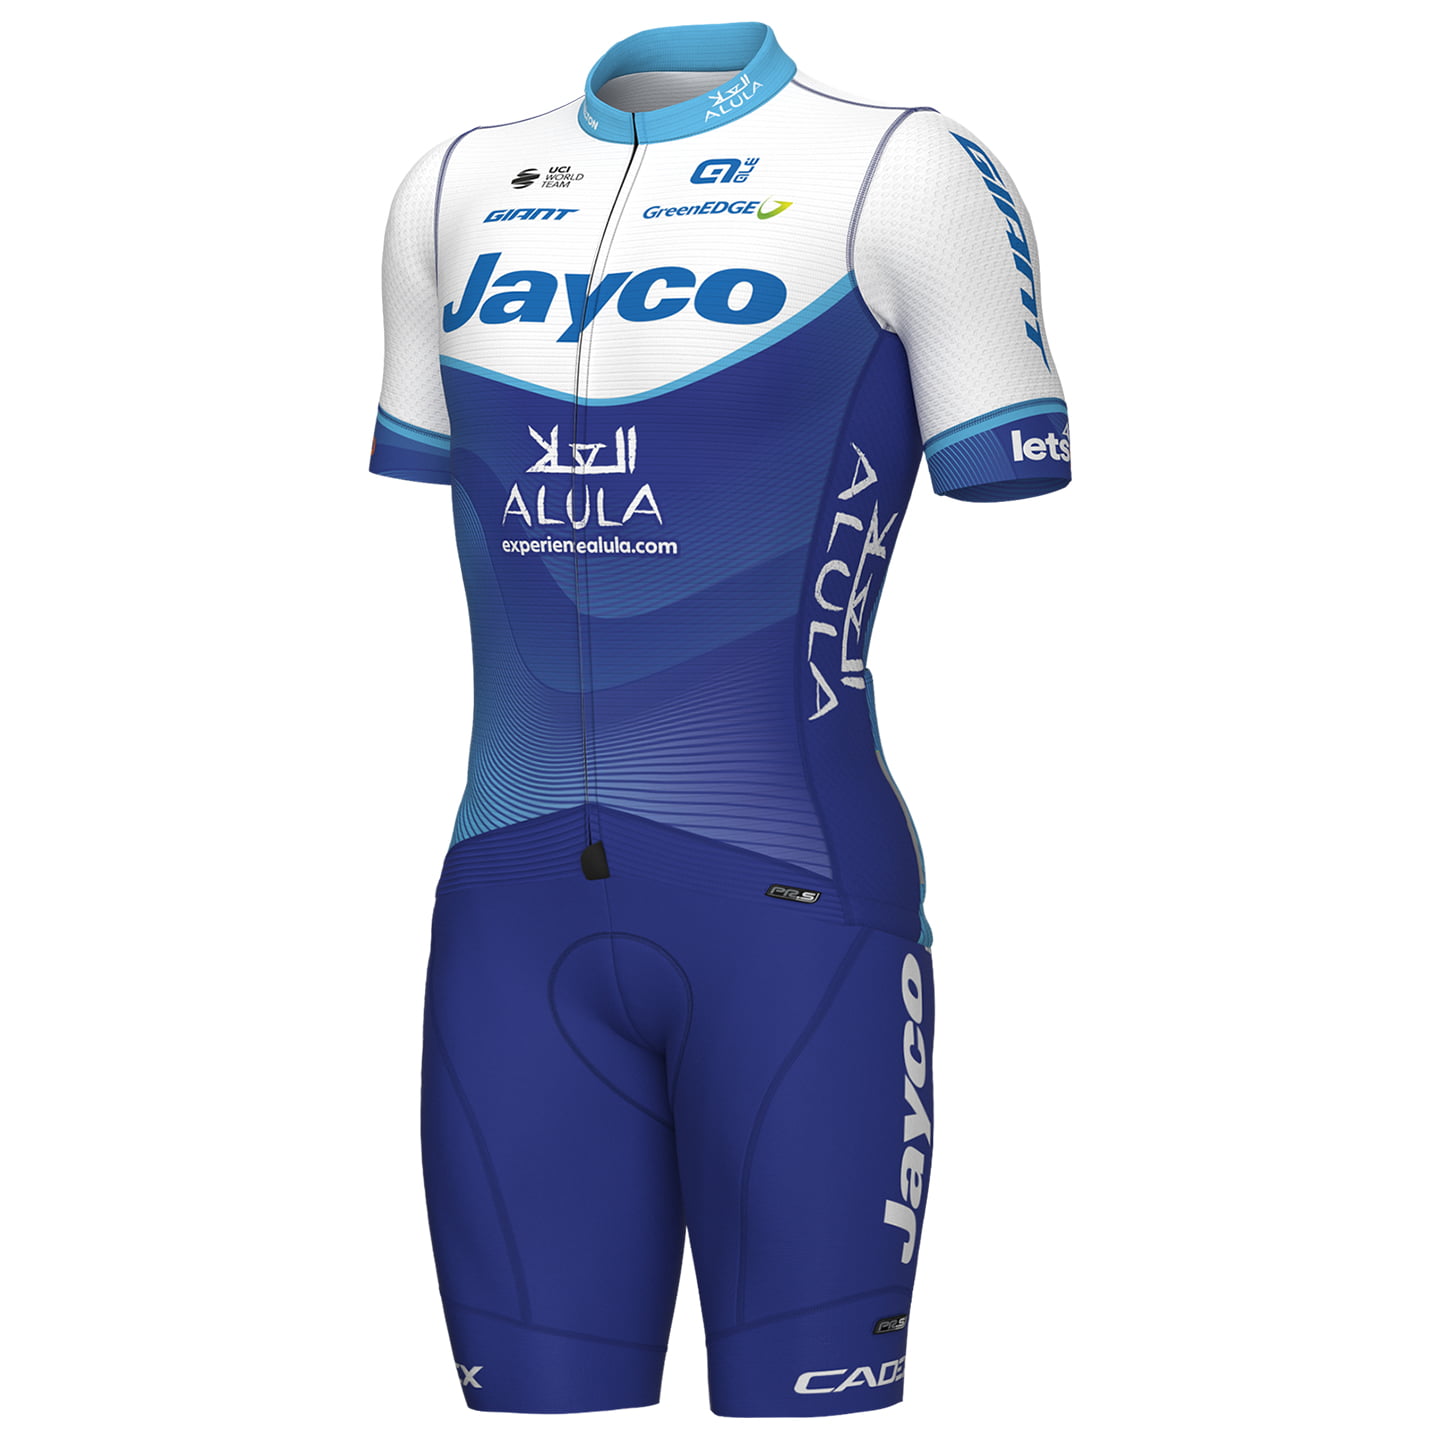 JAYCO-ALULA PR.S 2023 Set (cycling jersey + cycling shorts) Set (2 pieces), for men, Cycling clothing